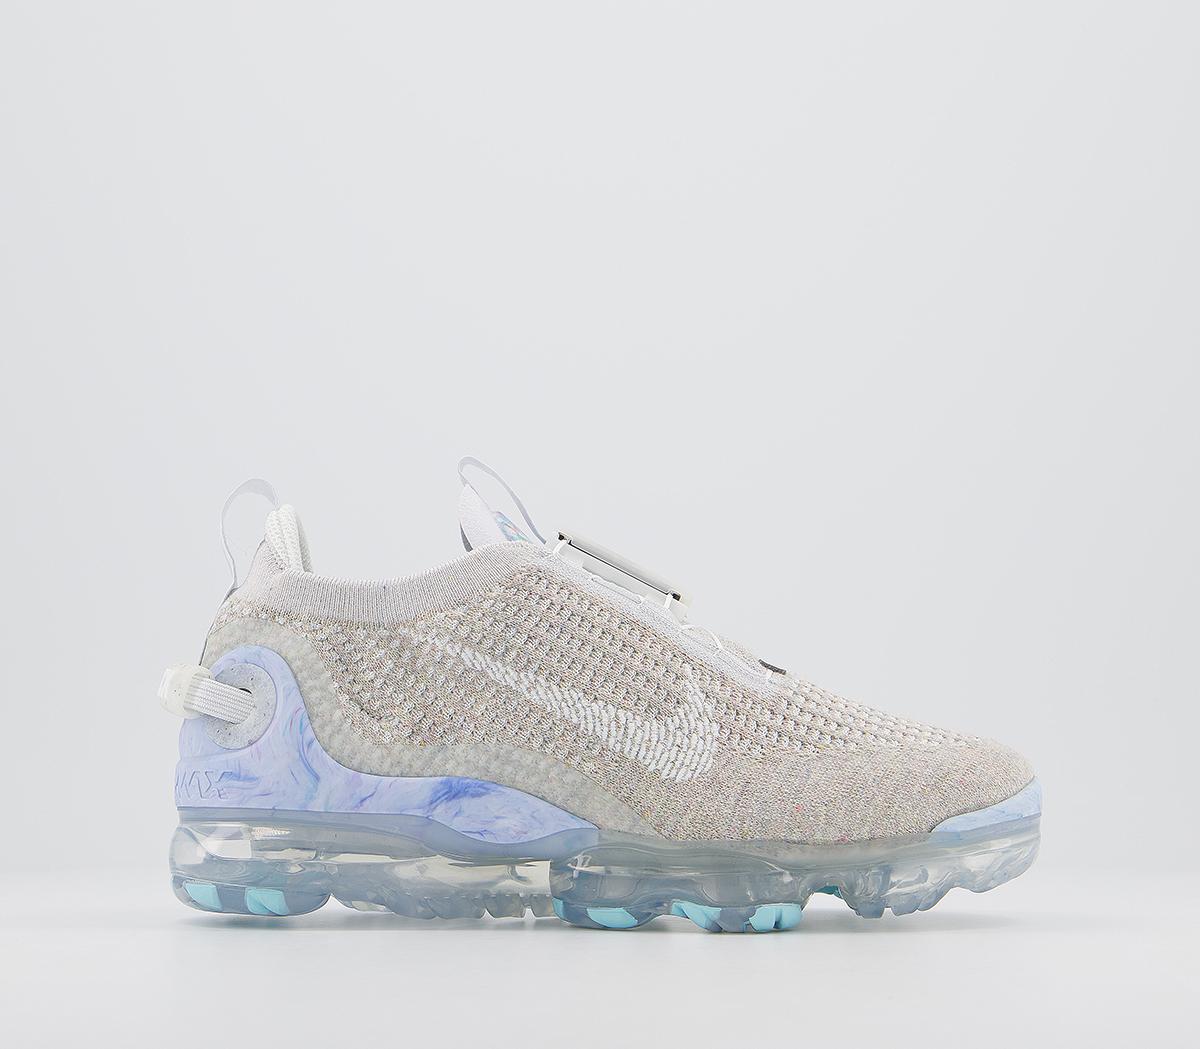 Nike Debut the VaporMax 2020 for Tokyo Olympics Sneaker